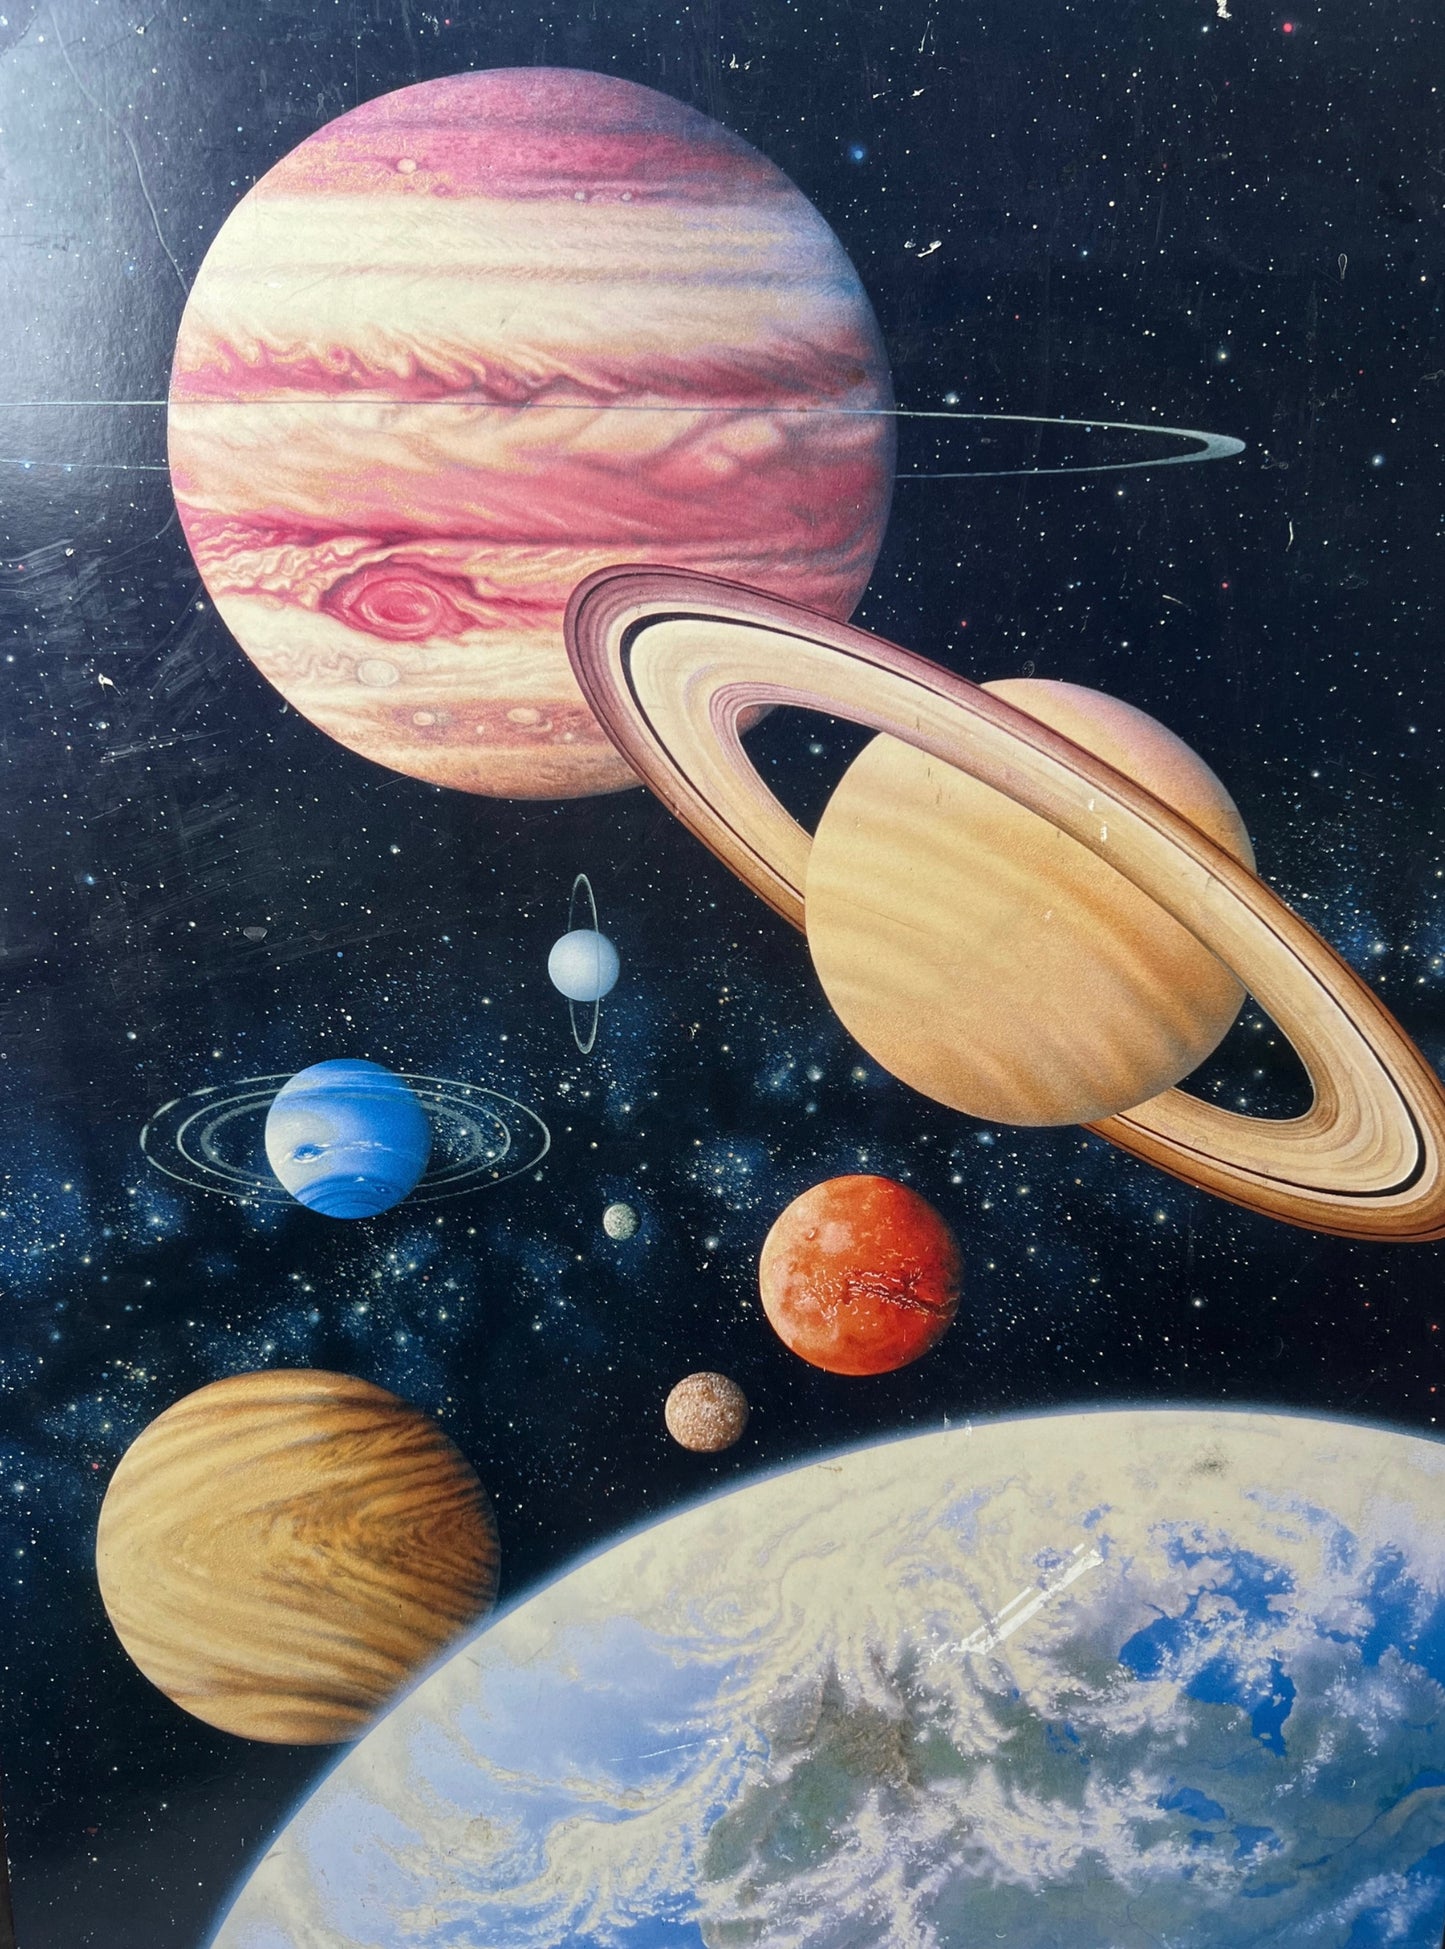 1997 Scholastic Solar System Space Poster Board 24” x 18.5”